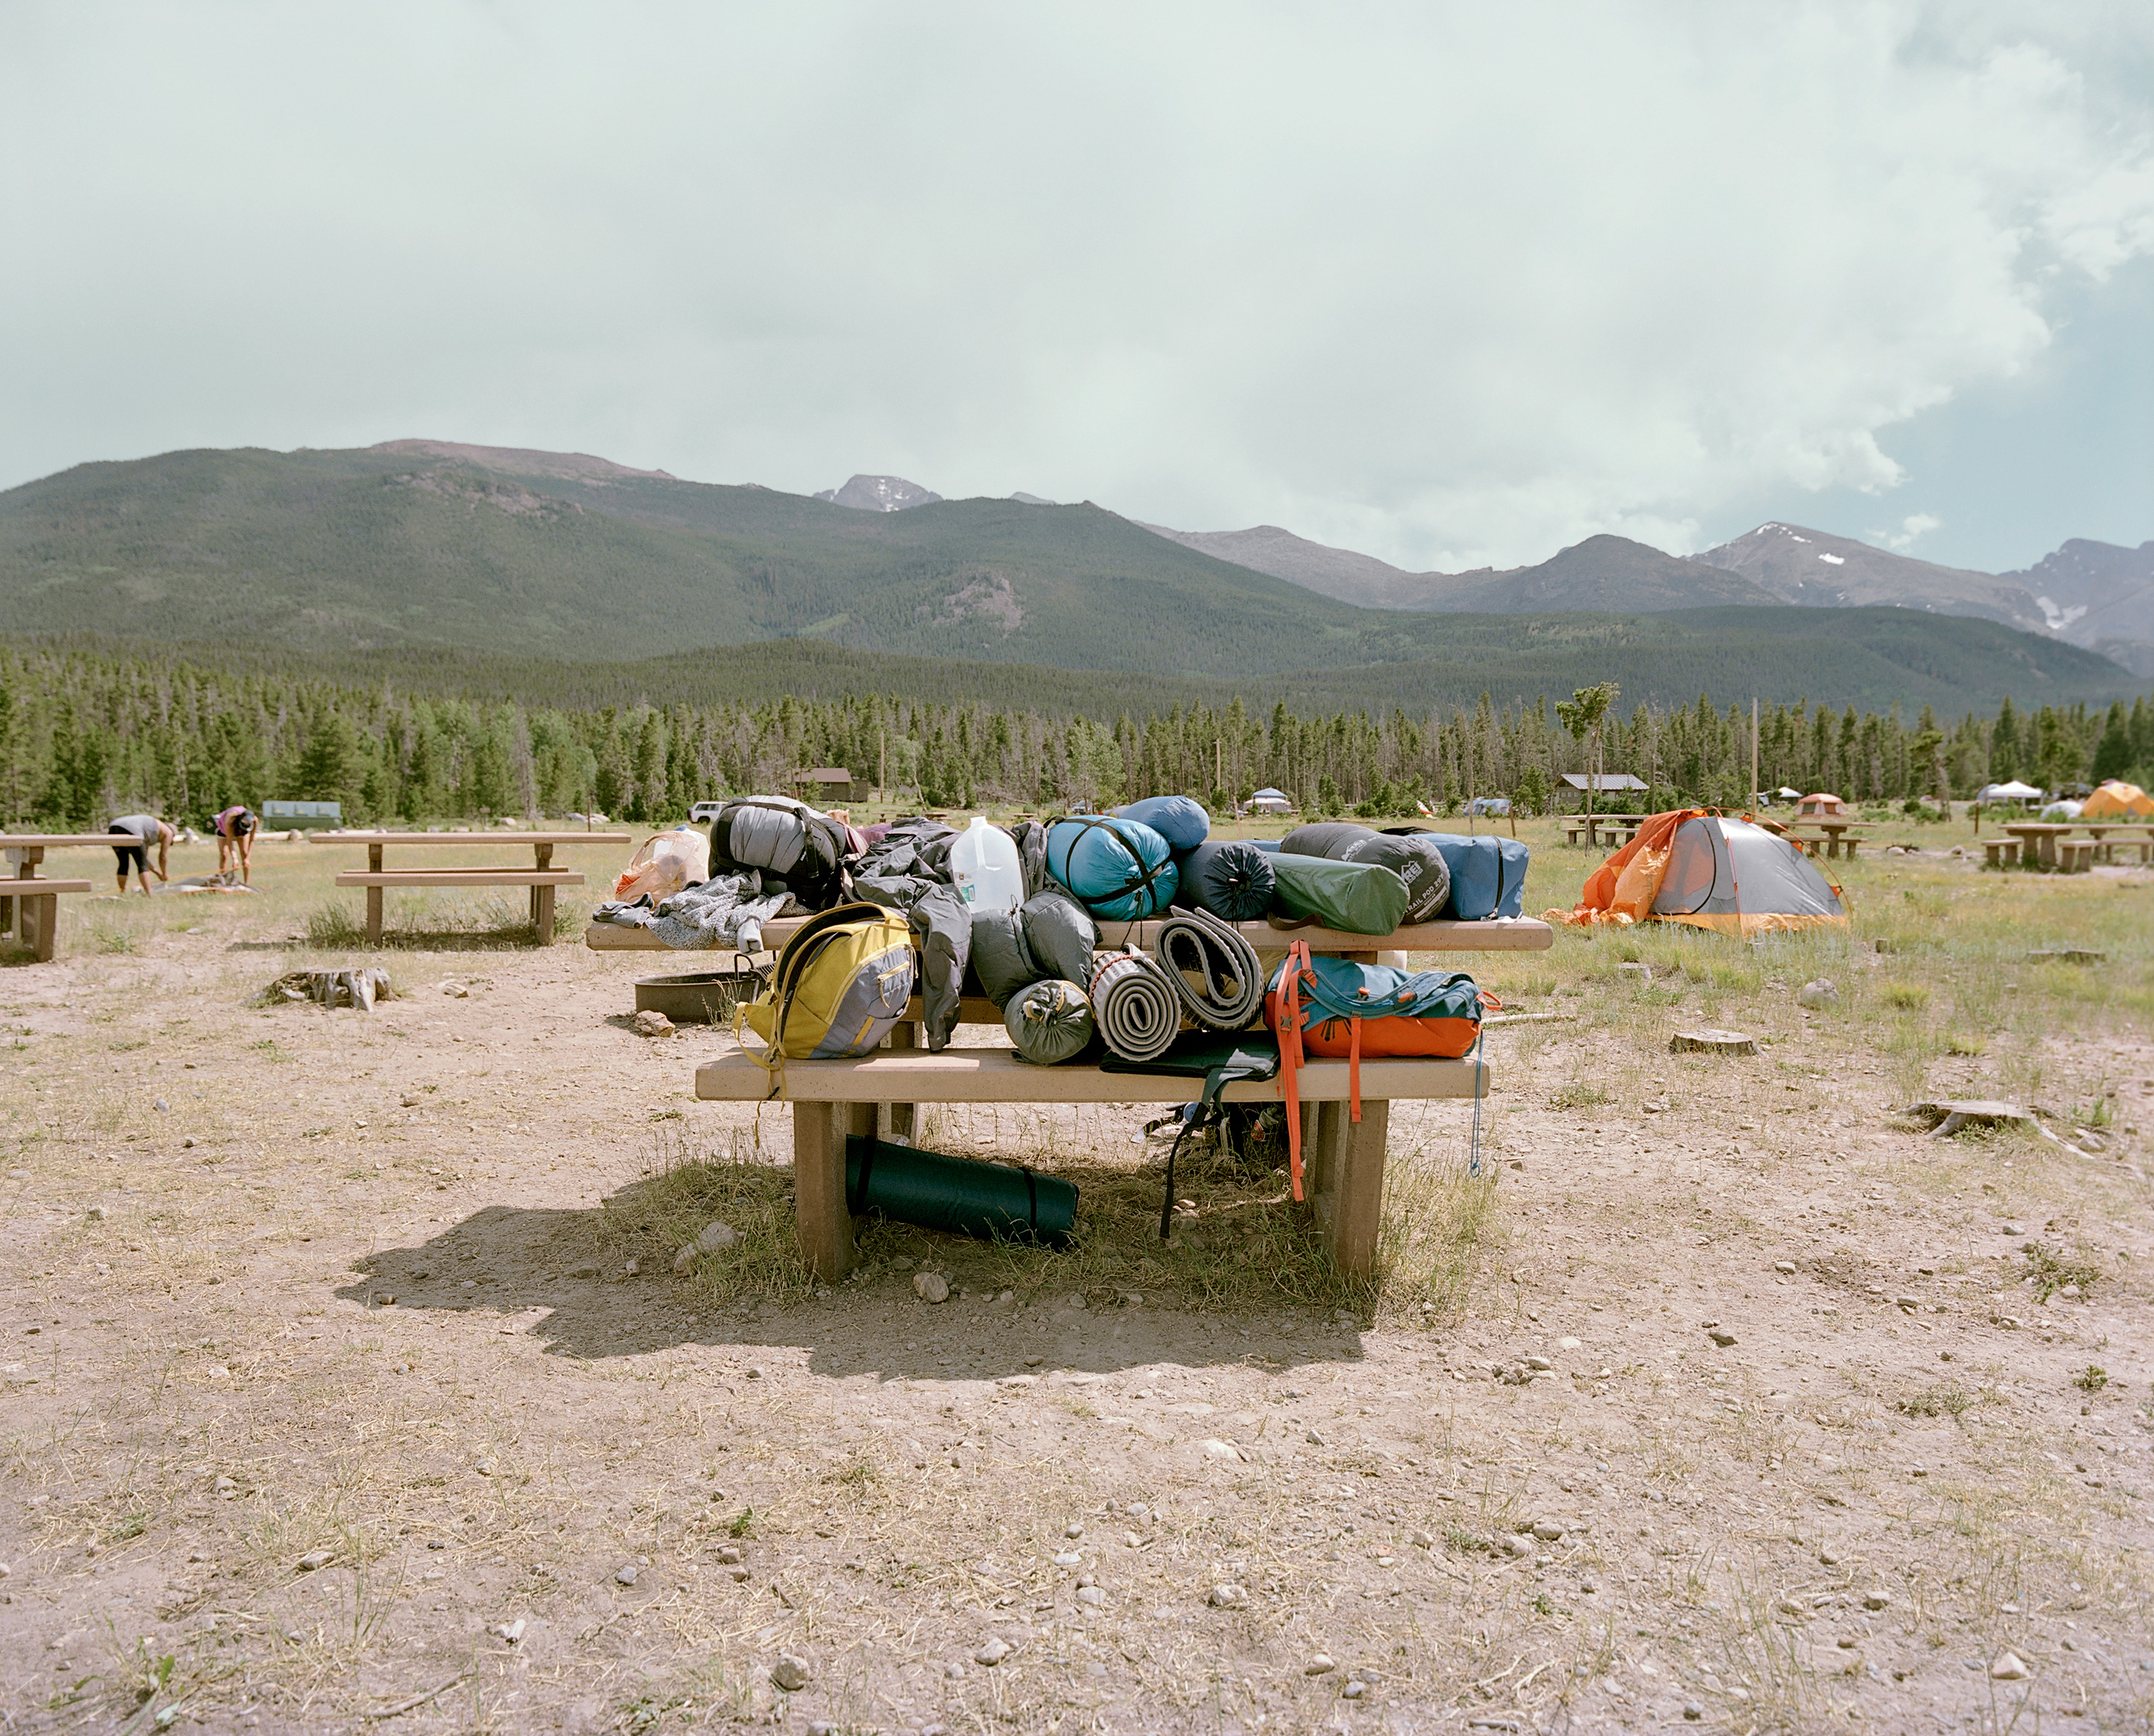 Leaders of Latino Outdoors Colorado set up camp at Glacier Basin Campsite in Rocky Mountain National Park on June 29, 2018. (Catherine Hyland for TIME)